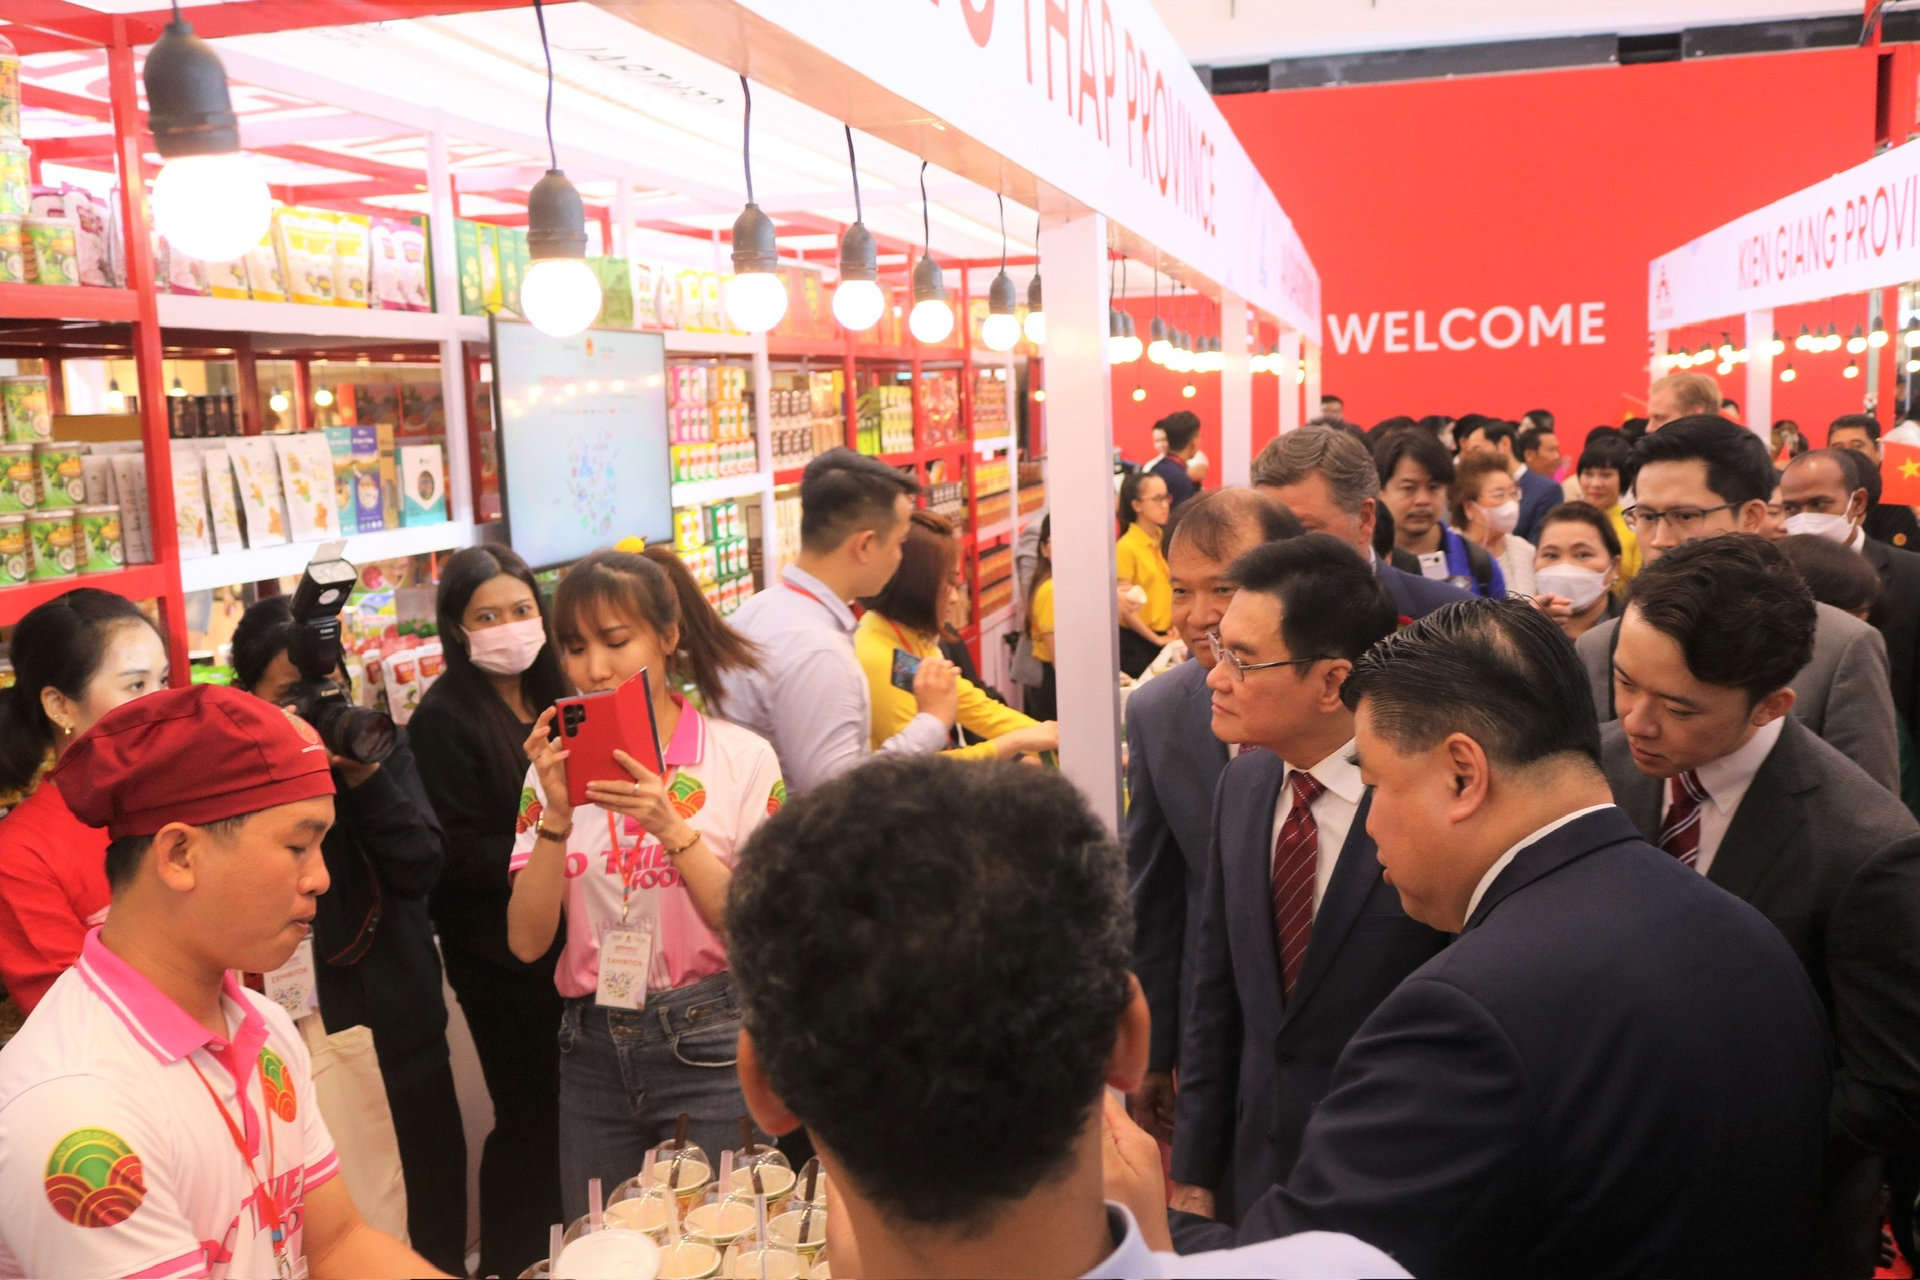 Delegates visit the food court, Southern specialties of Vietnam.